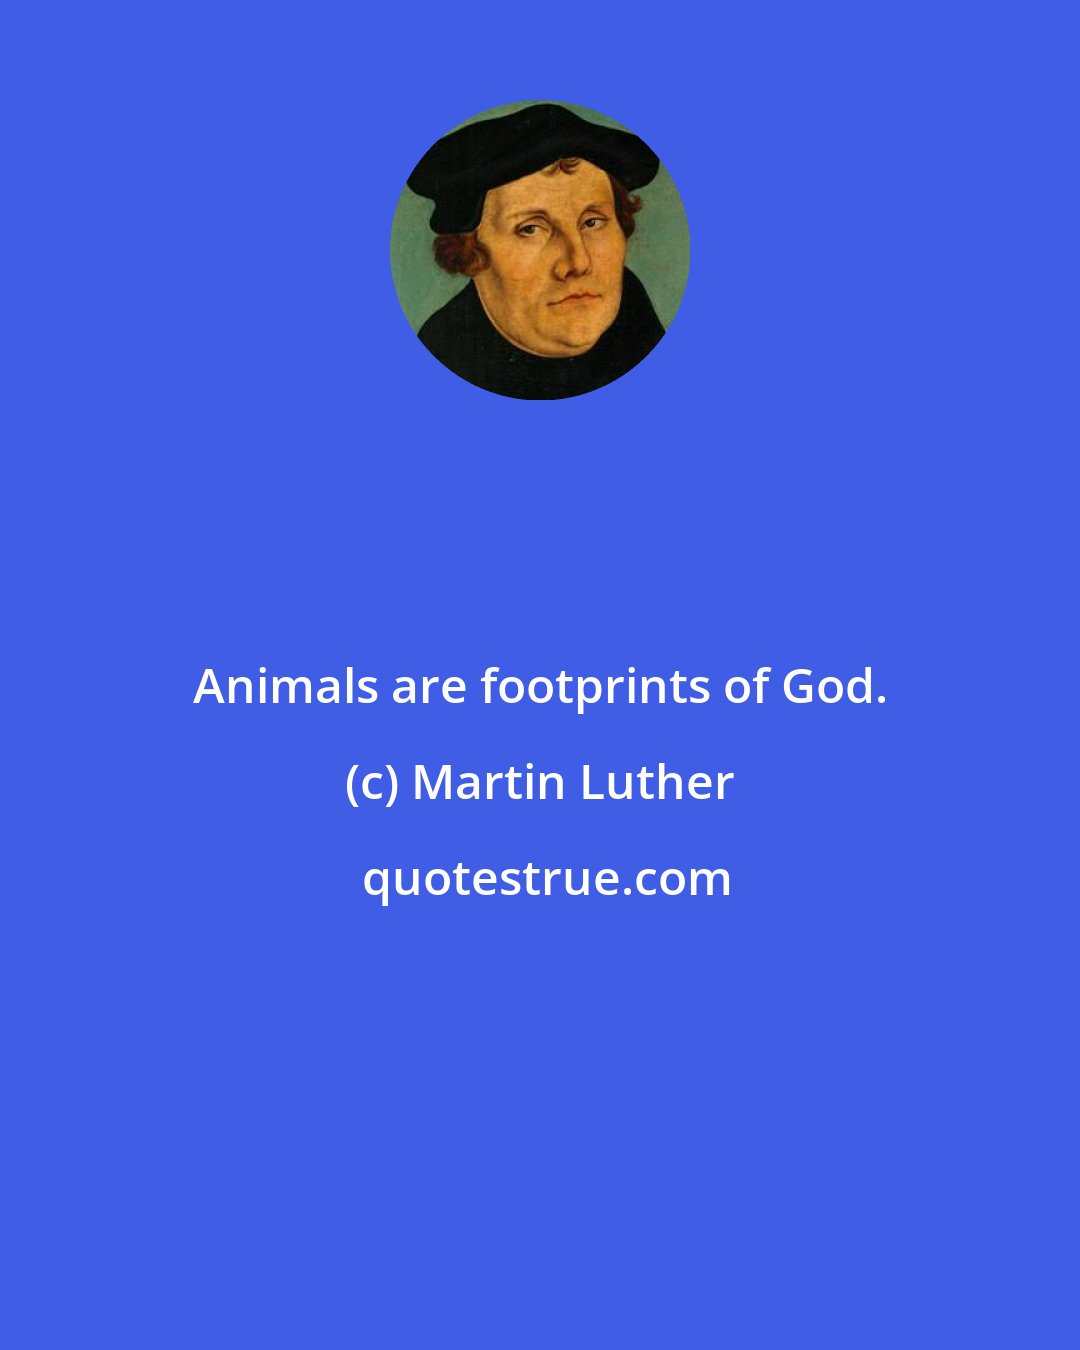 Martin Luther: Animals are footprints of God.